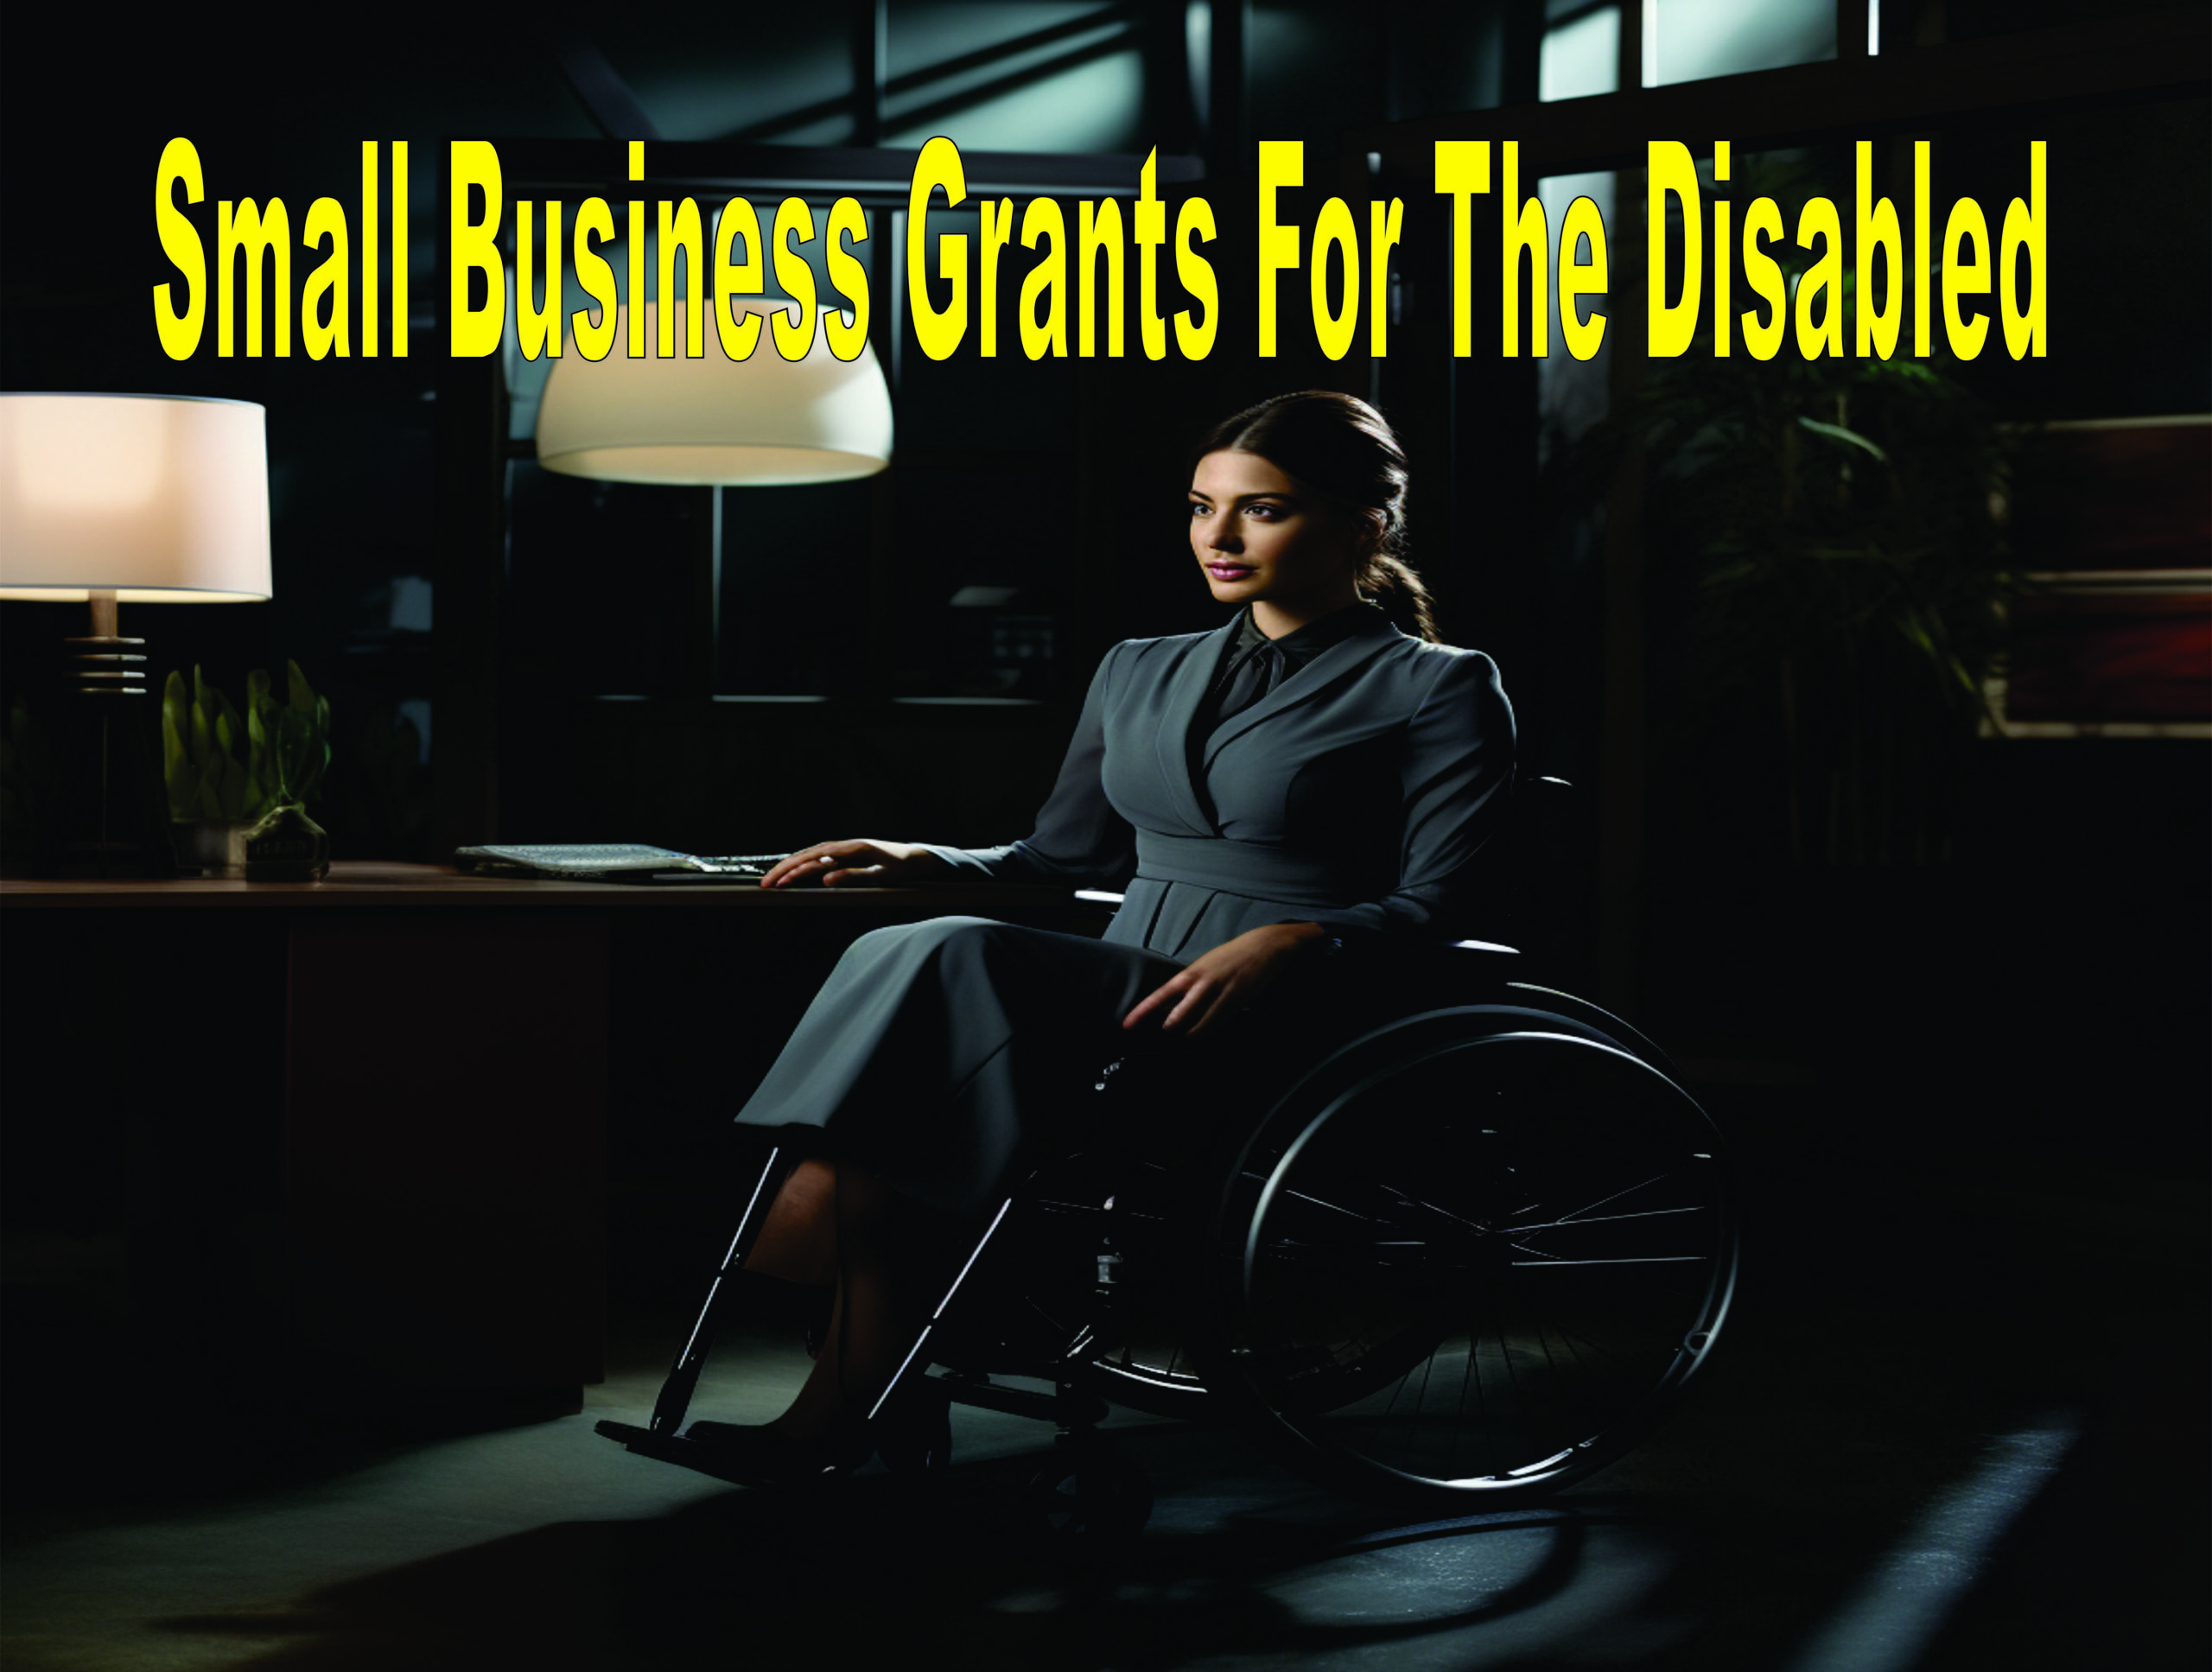 Small Business Grants For The Disabled